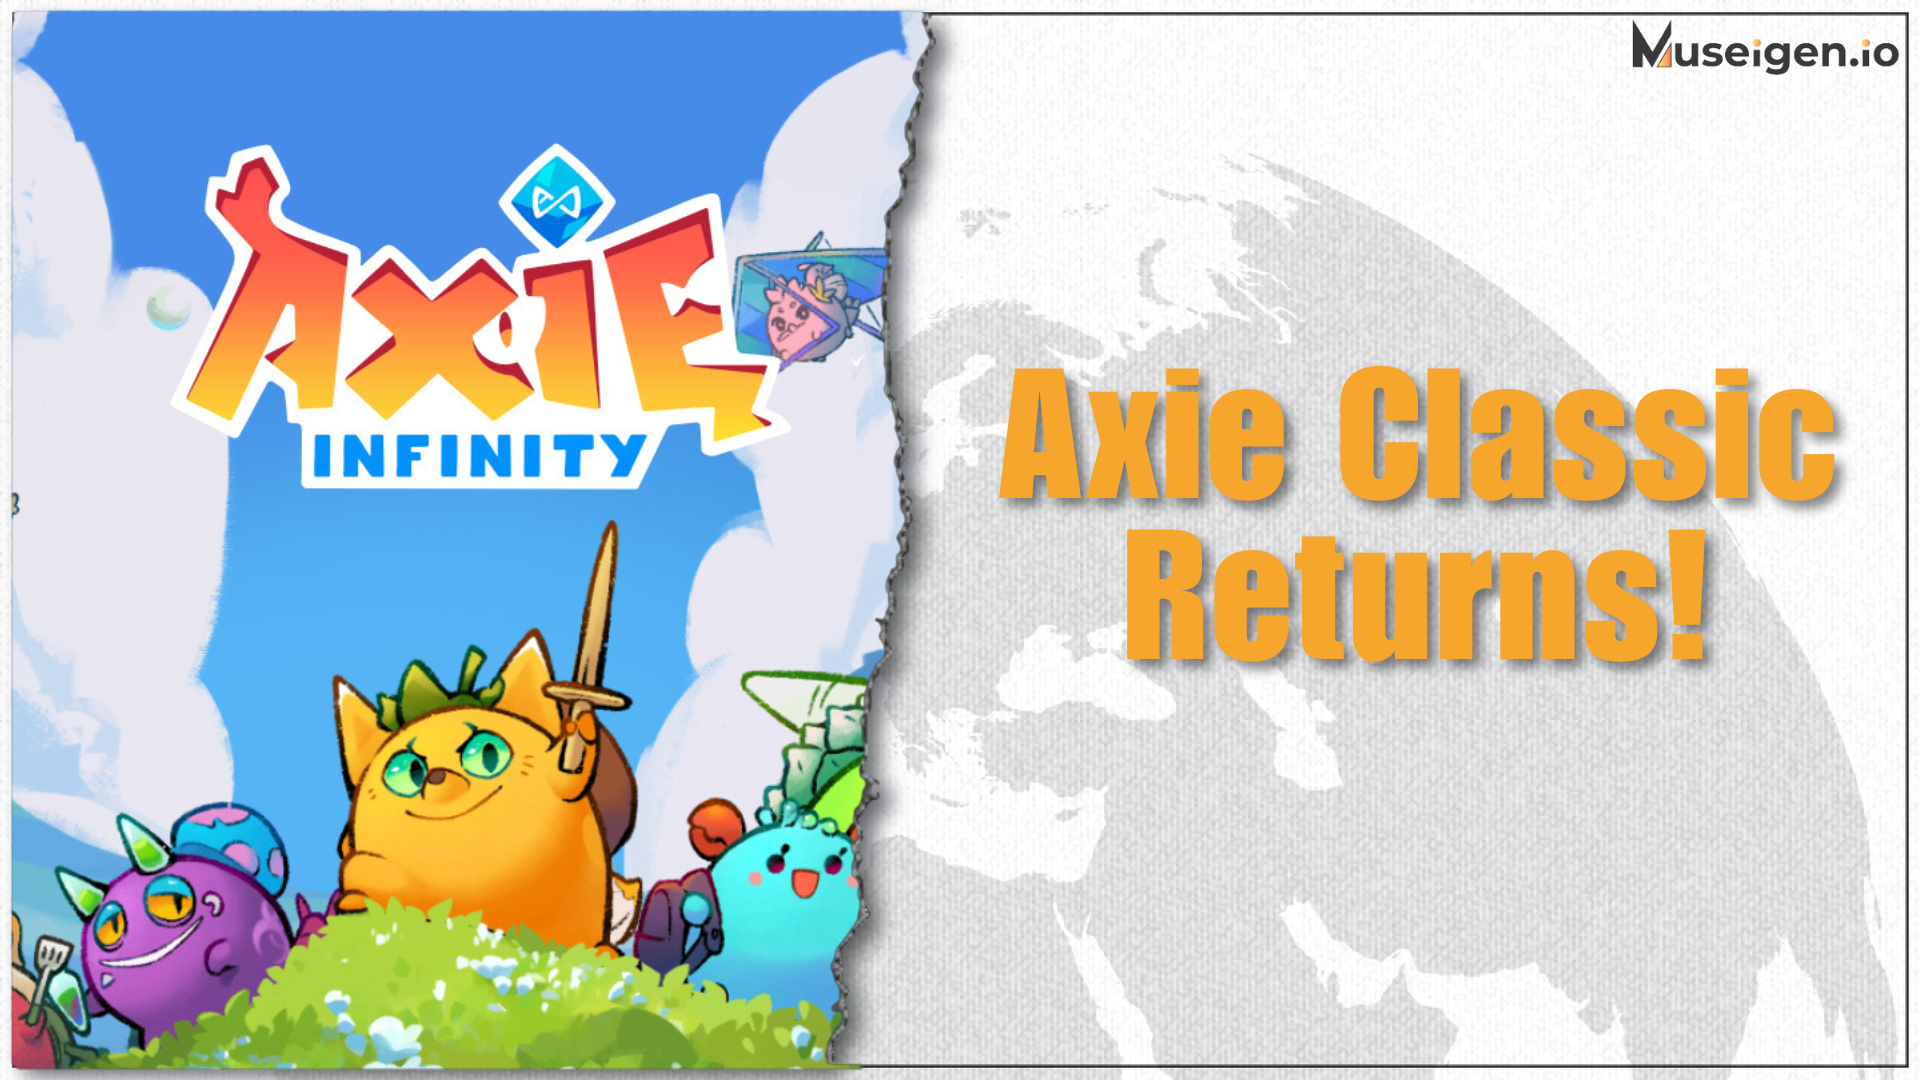 Axie Classic players excitedly returning to the game, featuring the new Cursed Coliseum and the promise of exciting challenges.